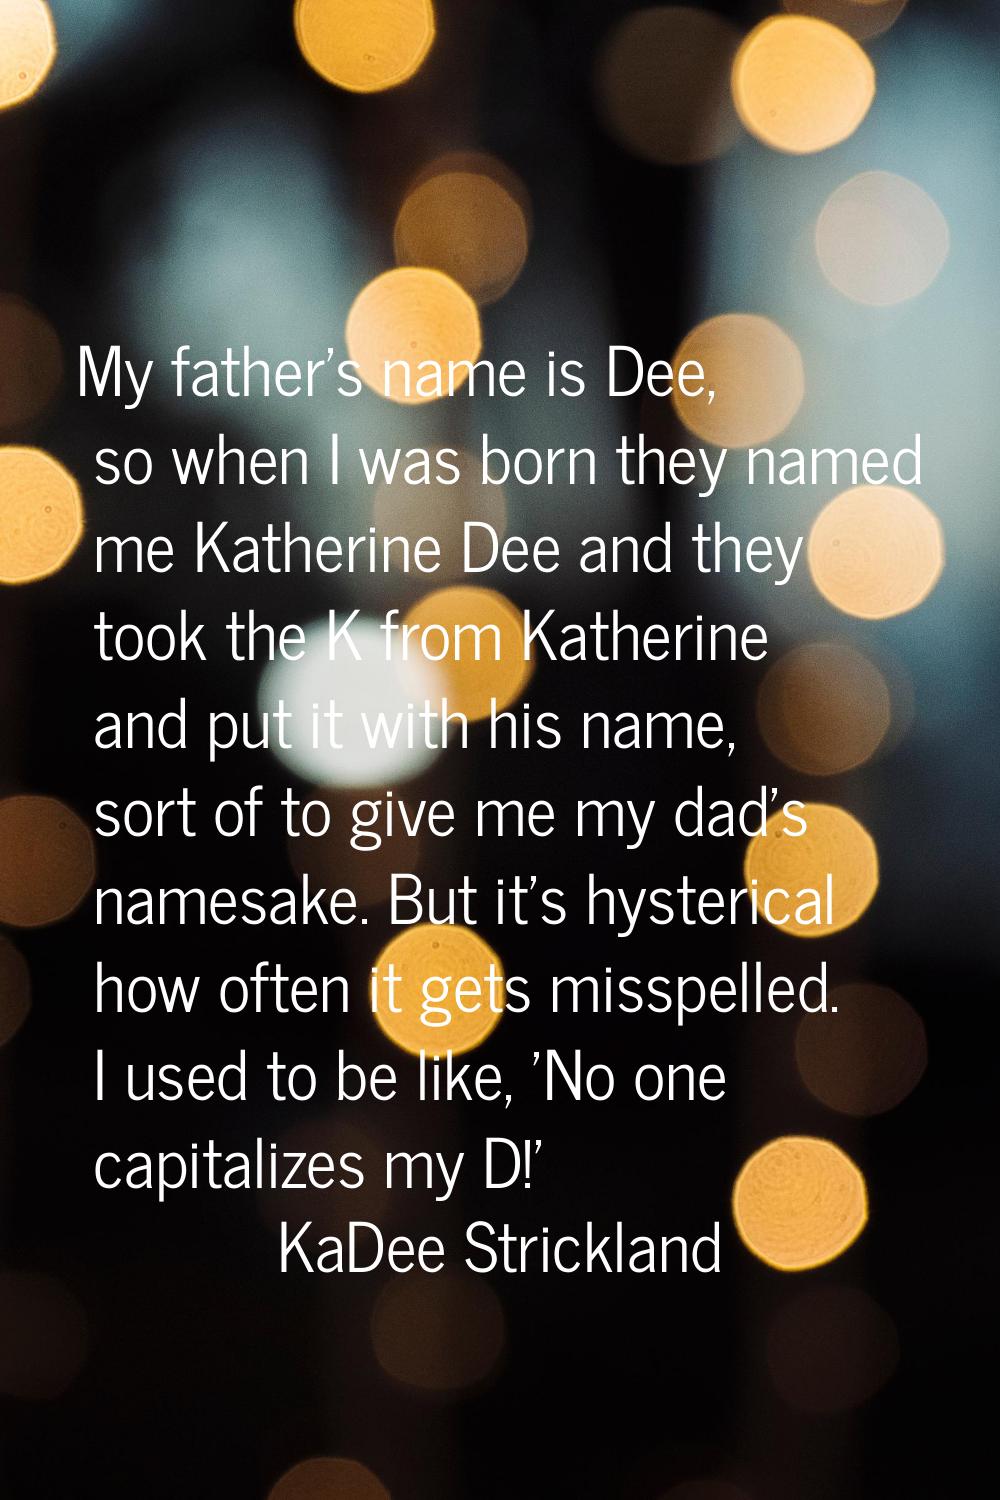 My father's name is Dee, so when I was born they named me Katherine Dee and they took the K from Ka